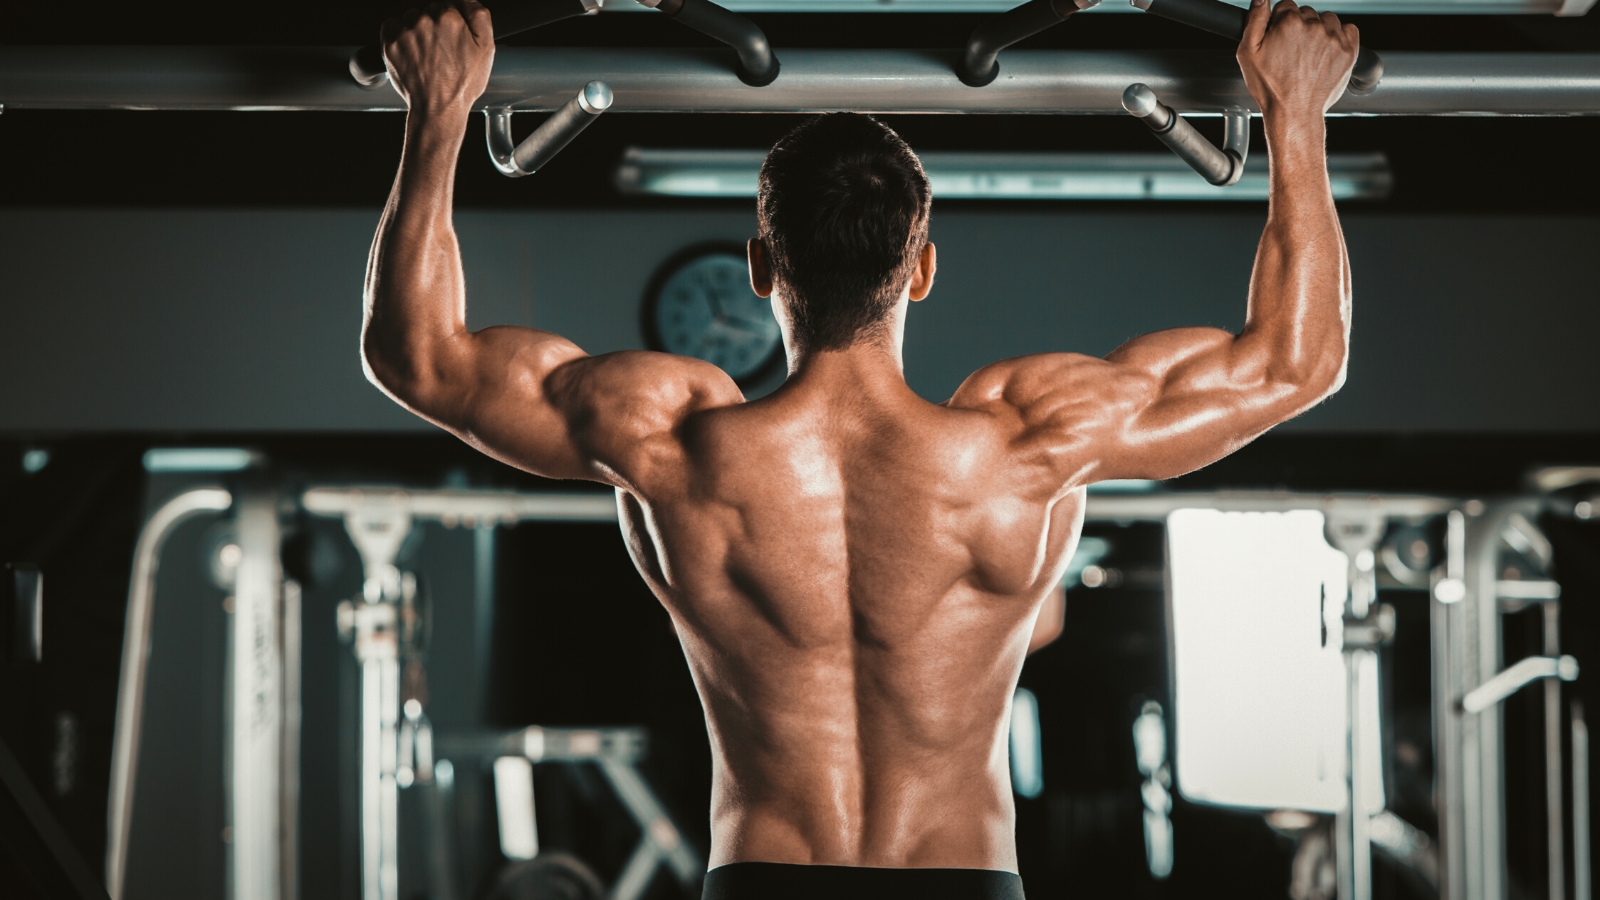 Anatomy of Growth: How to Train Your Back Muscles